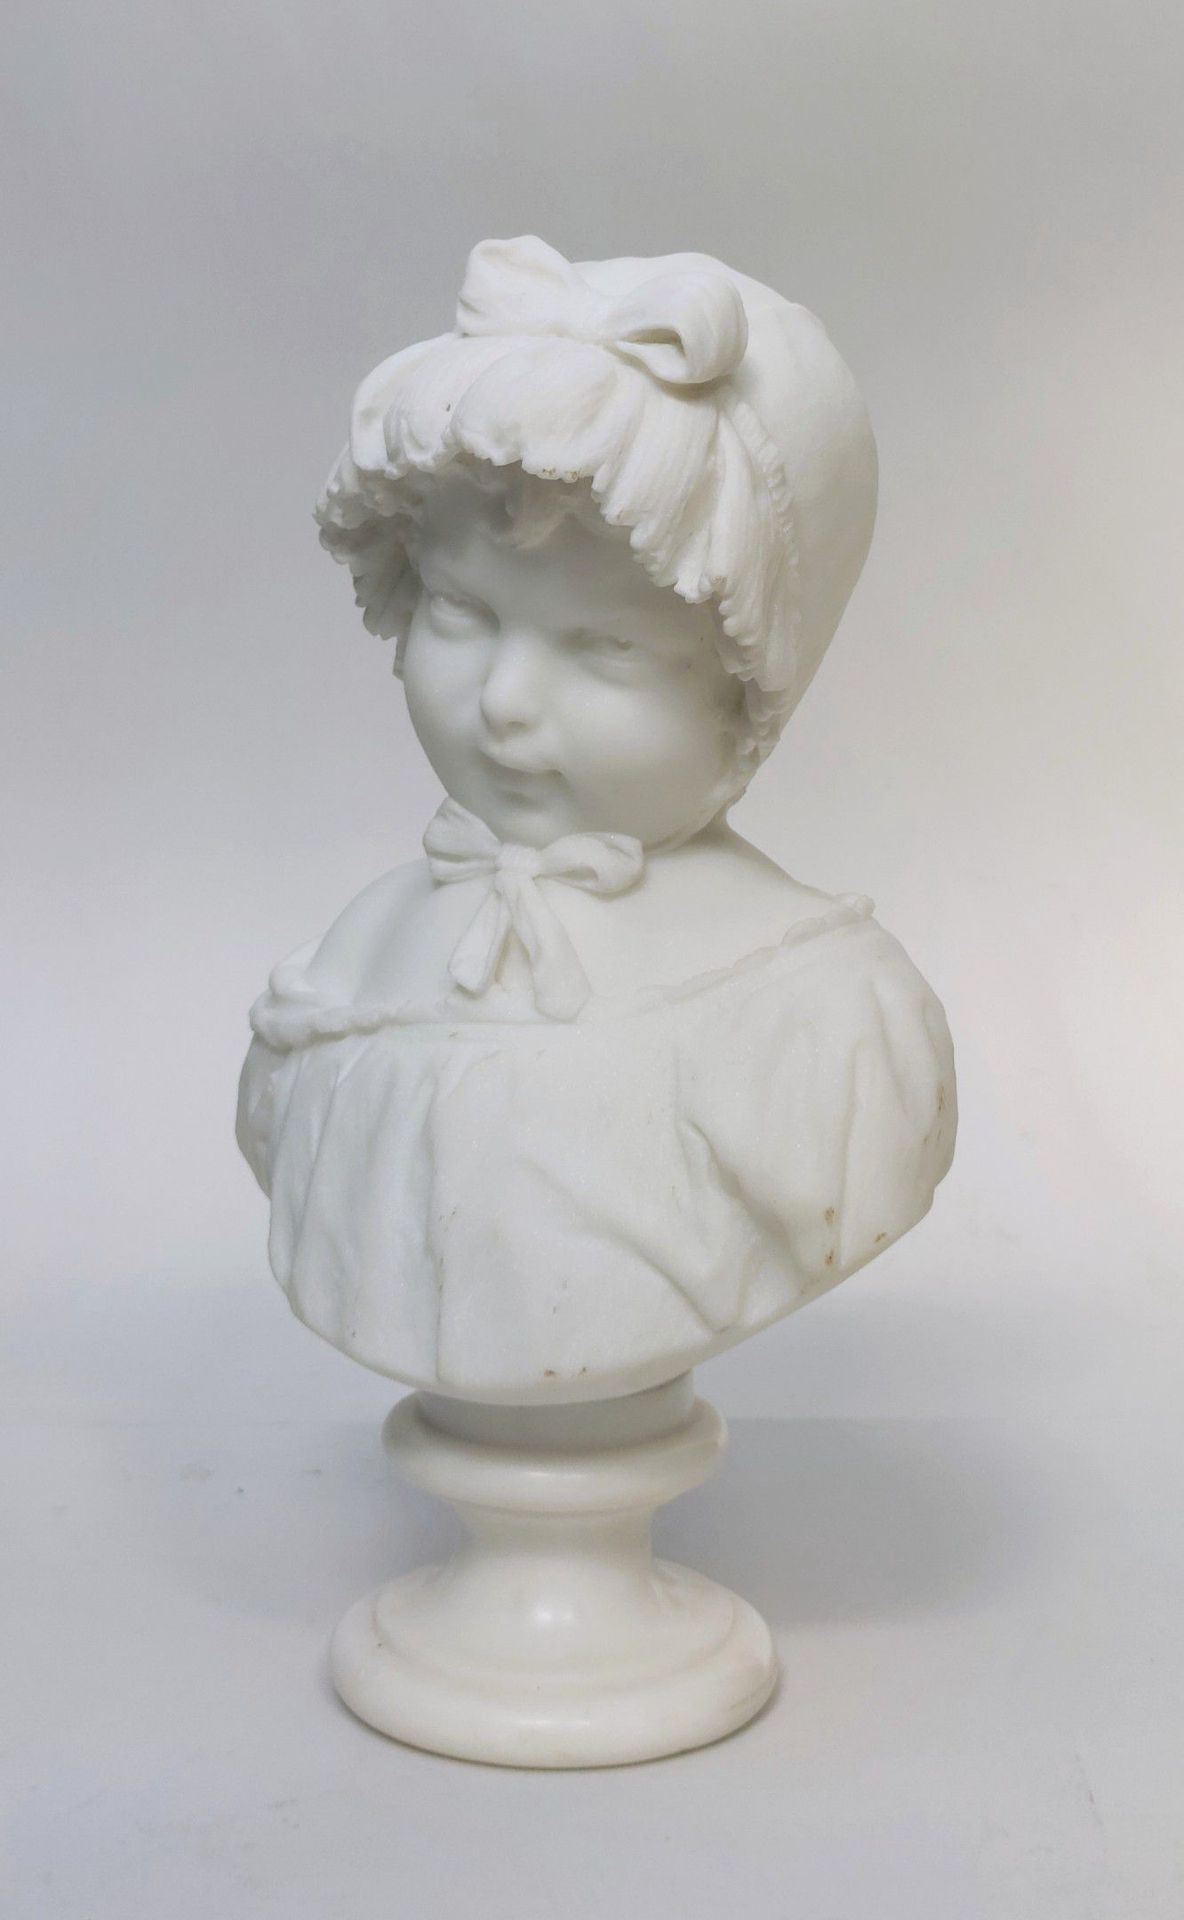 Null Quirini TEMPRA (1849-1888)

Bust of a little girl

Marble sculpture signed &hellip;